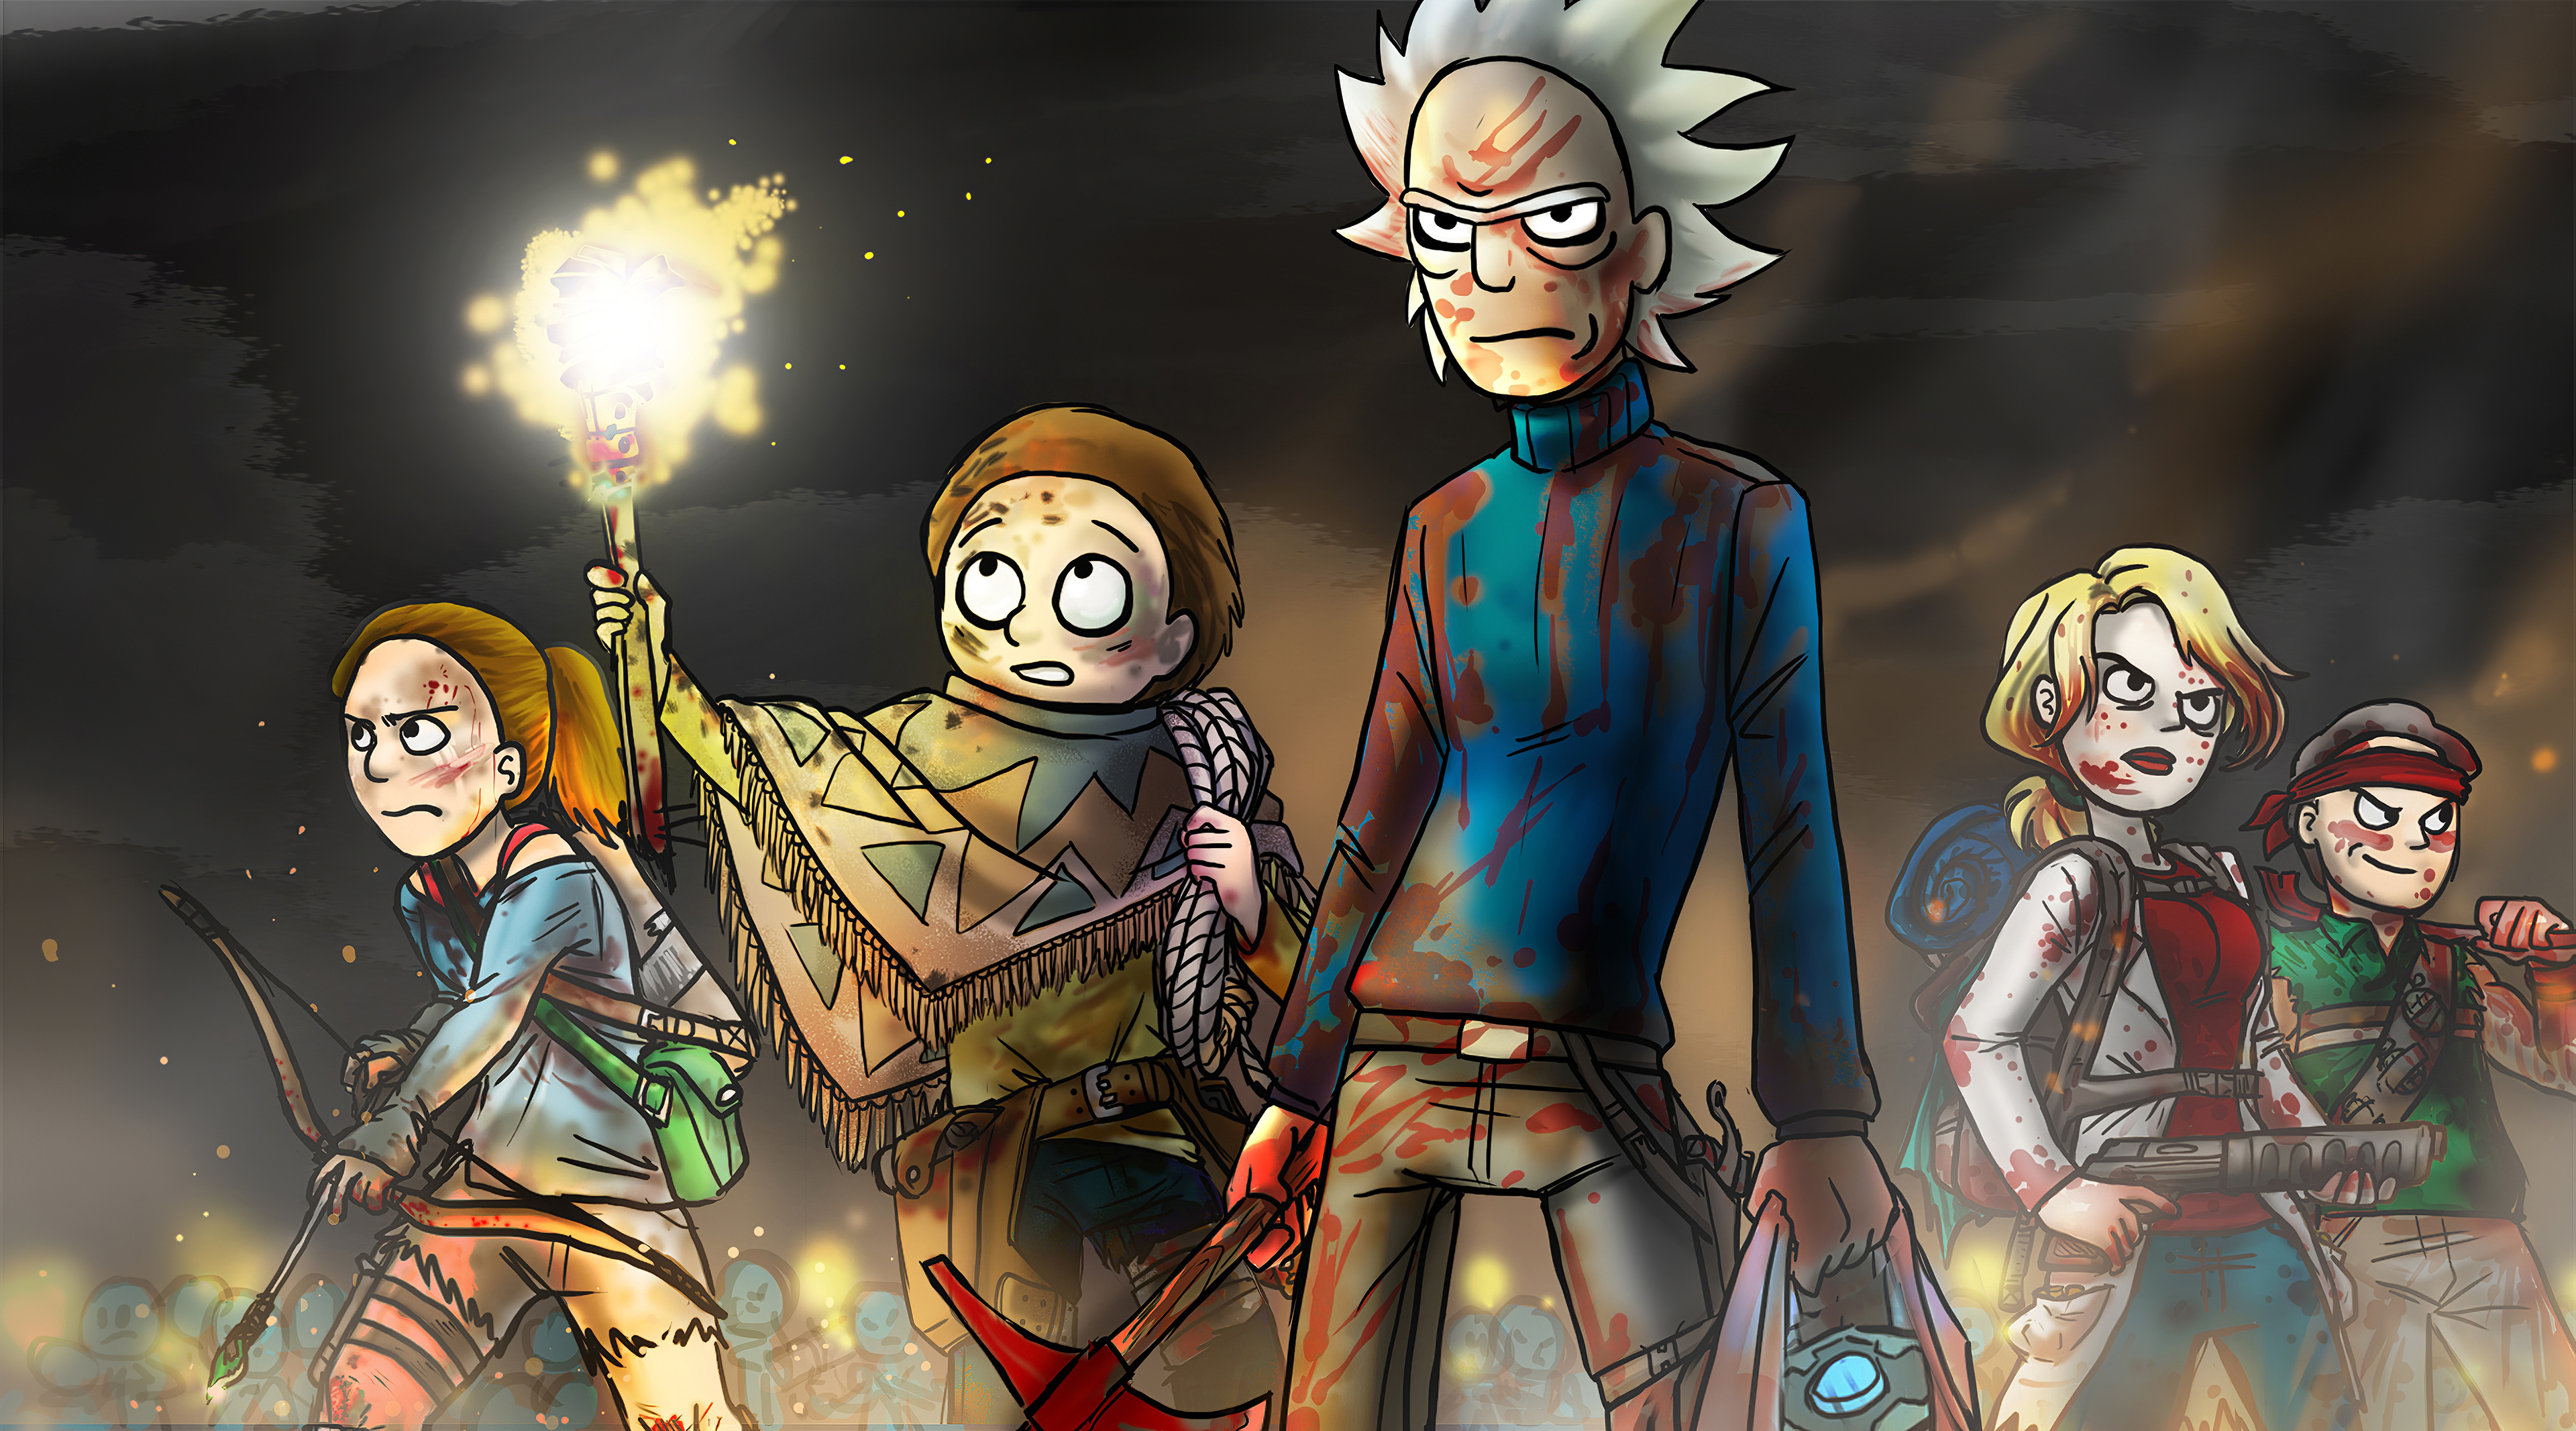 Rick and Morty 2019 Art Wallpaper, HD TV Series 4K Wallpapers, Images,  Photos and Background - Wallpapers Den